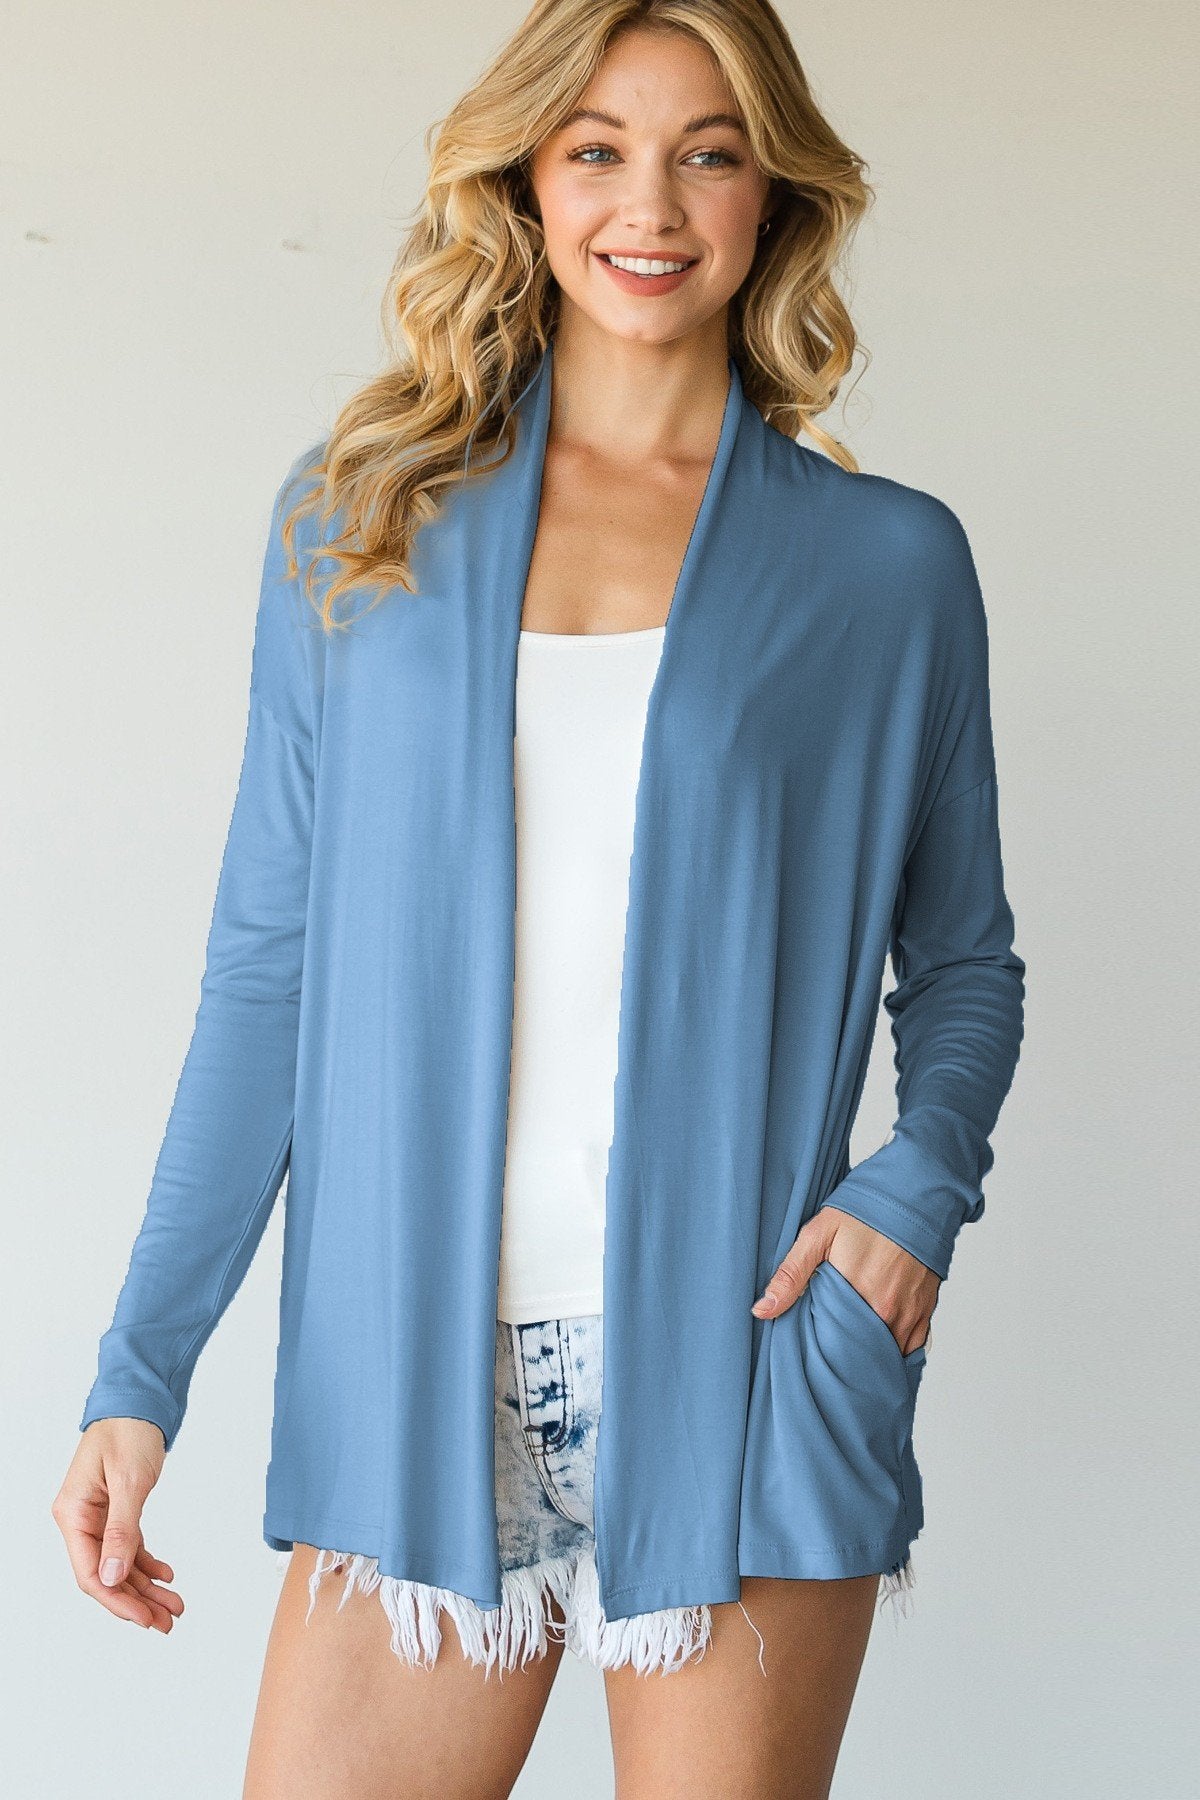 Casual Blue Cardigan Featuring Collar And Side Pockets_ Coats & Jackets jehouze 